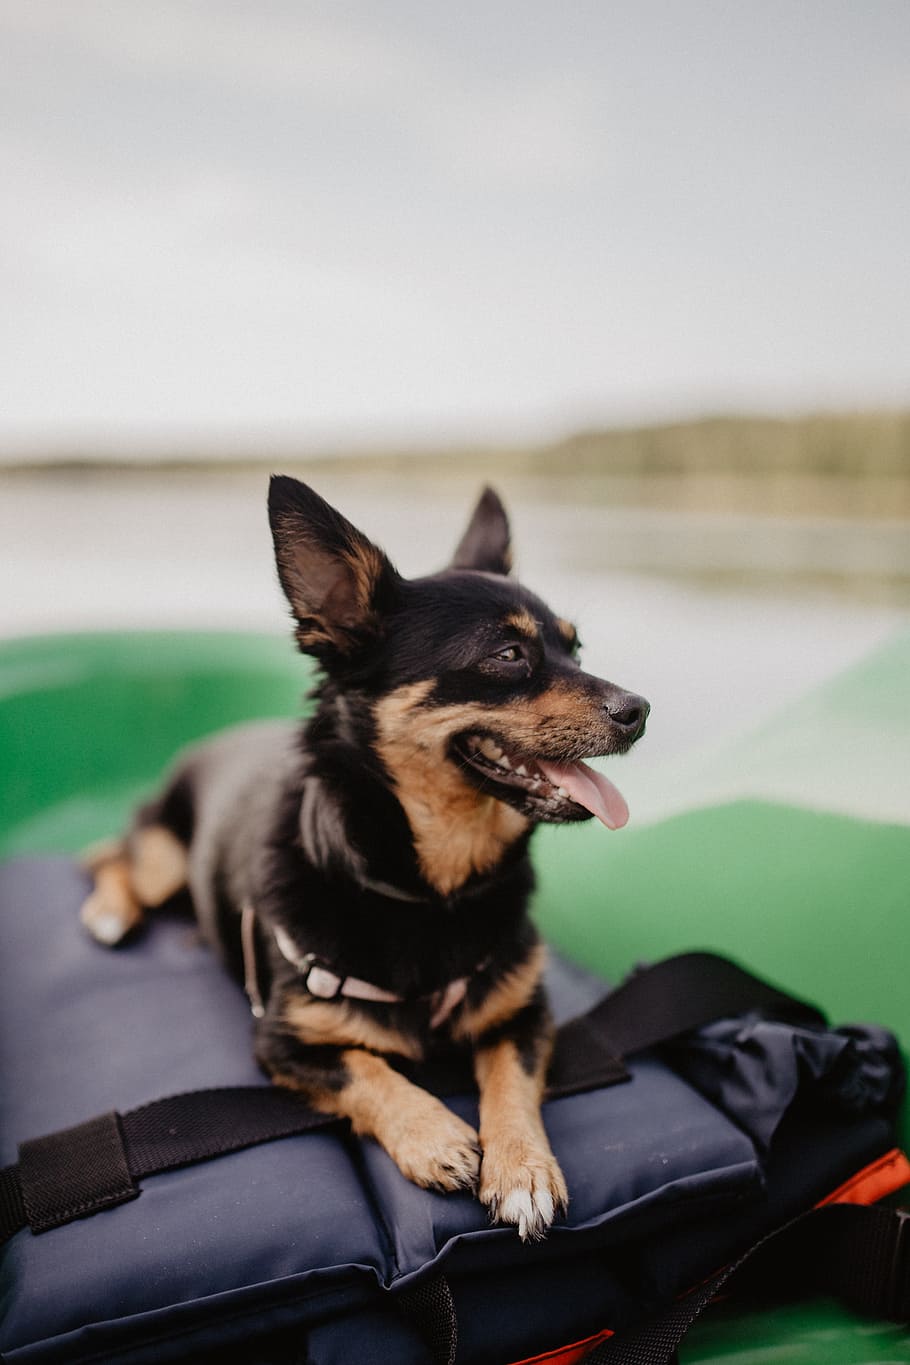 Happy dog in a kayak, pet, animal, puppy, pets, one animal, domestic